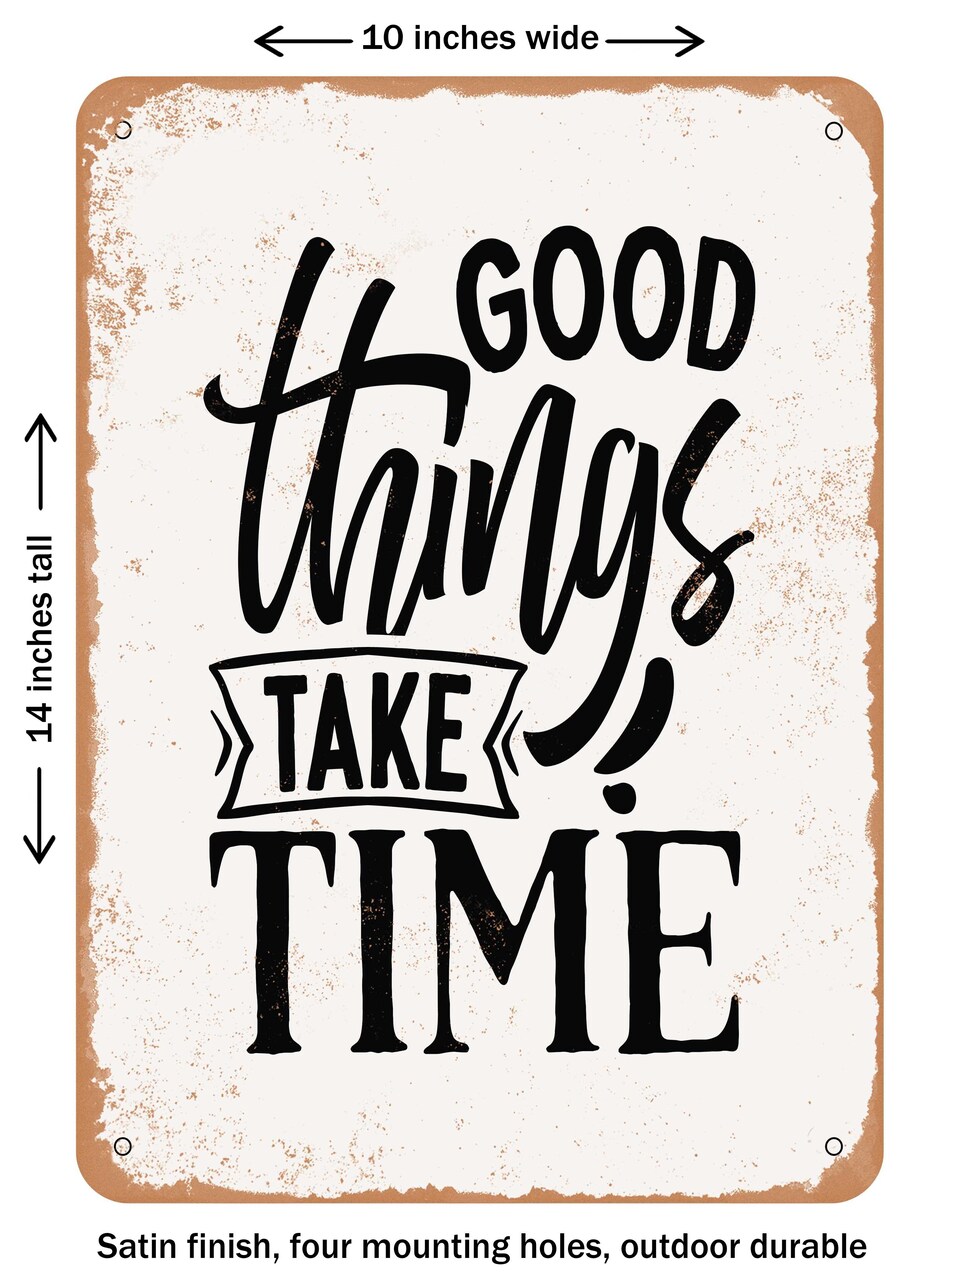 DECORATIVE METAL SIGN - Good Things Take Time - 3  - Vintage Rusty Look